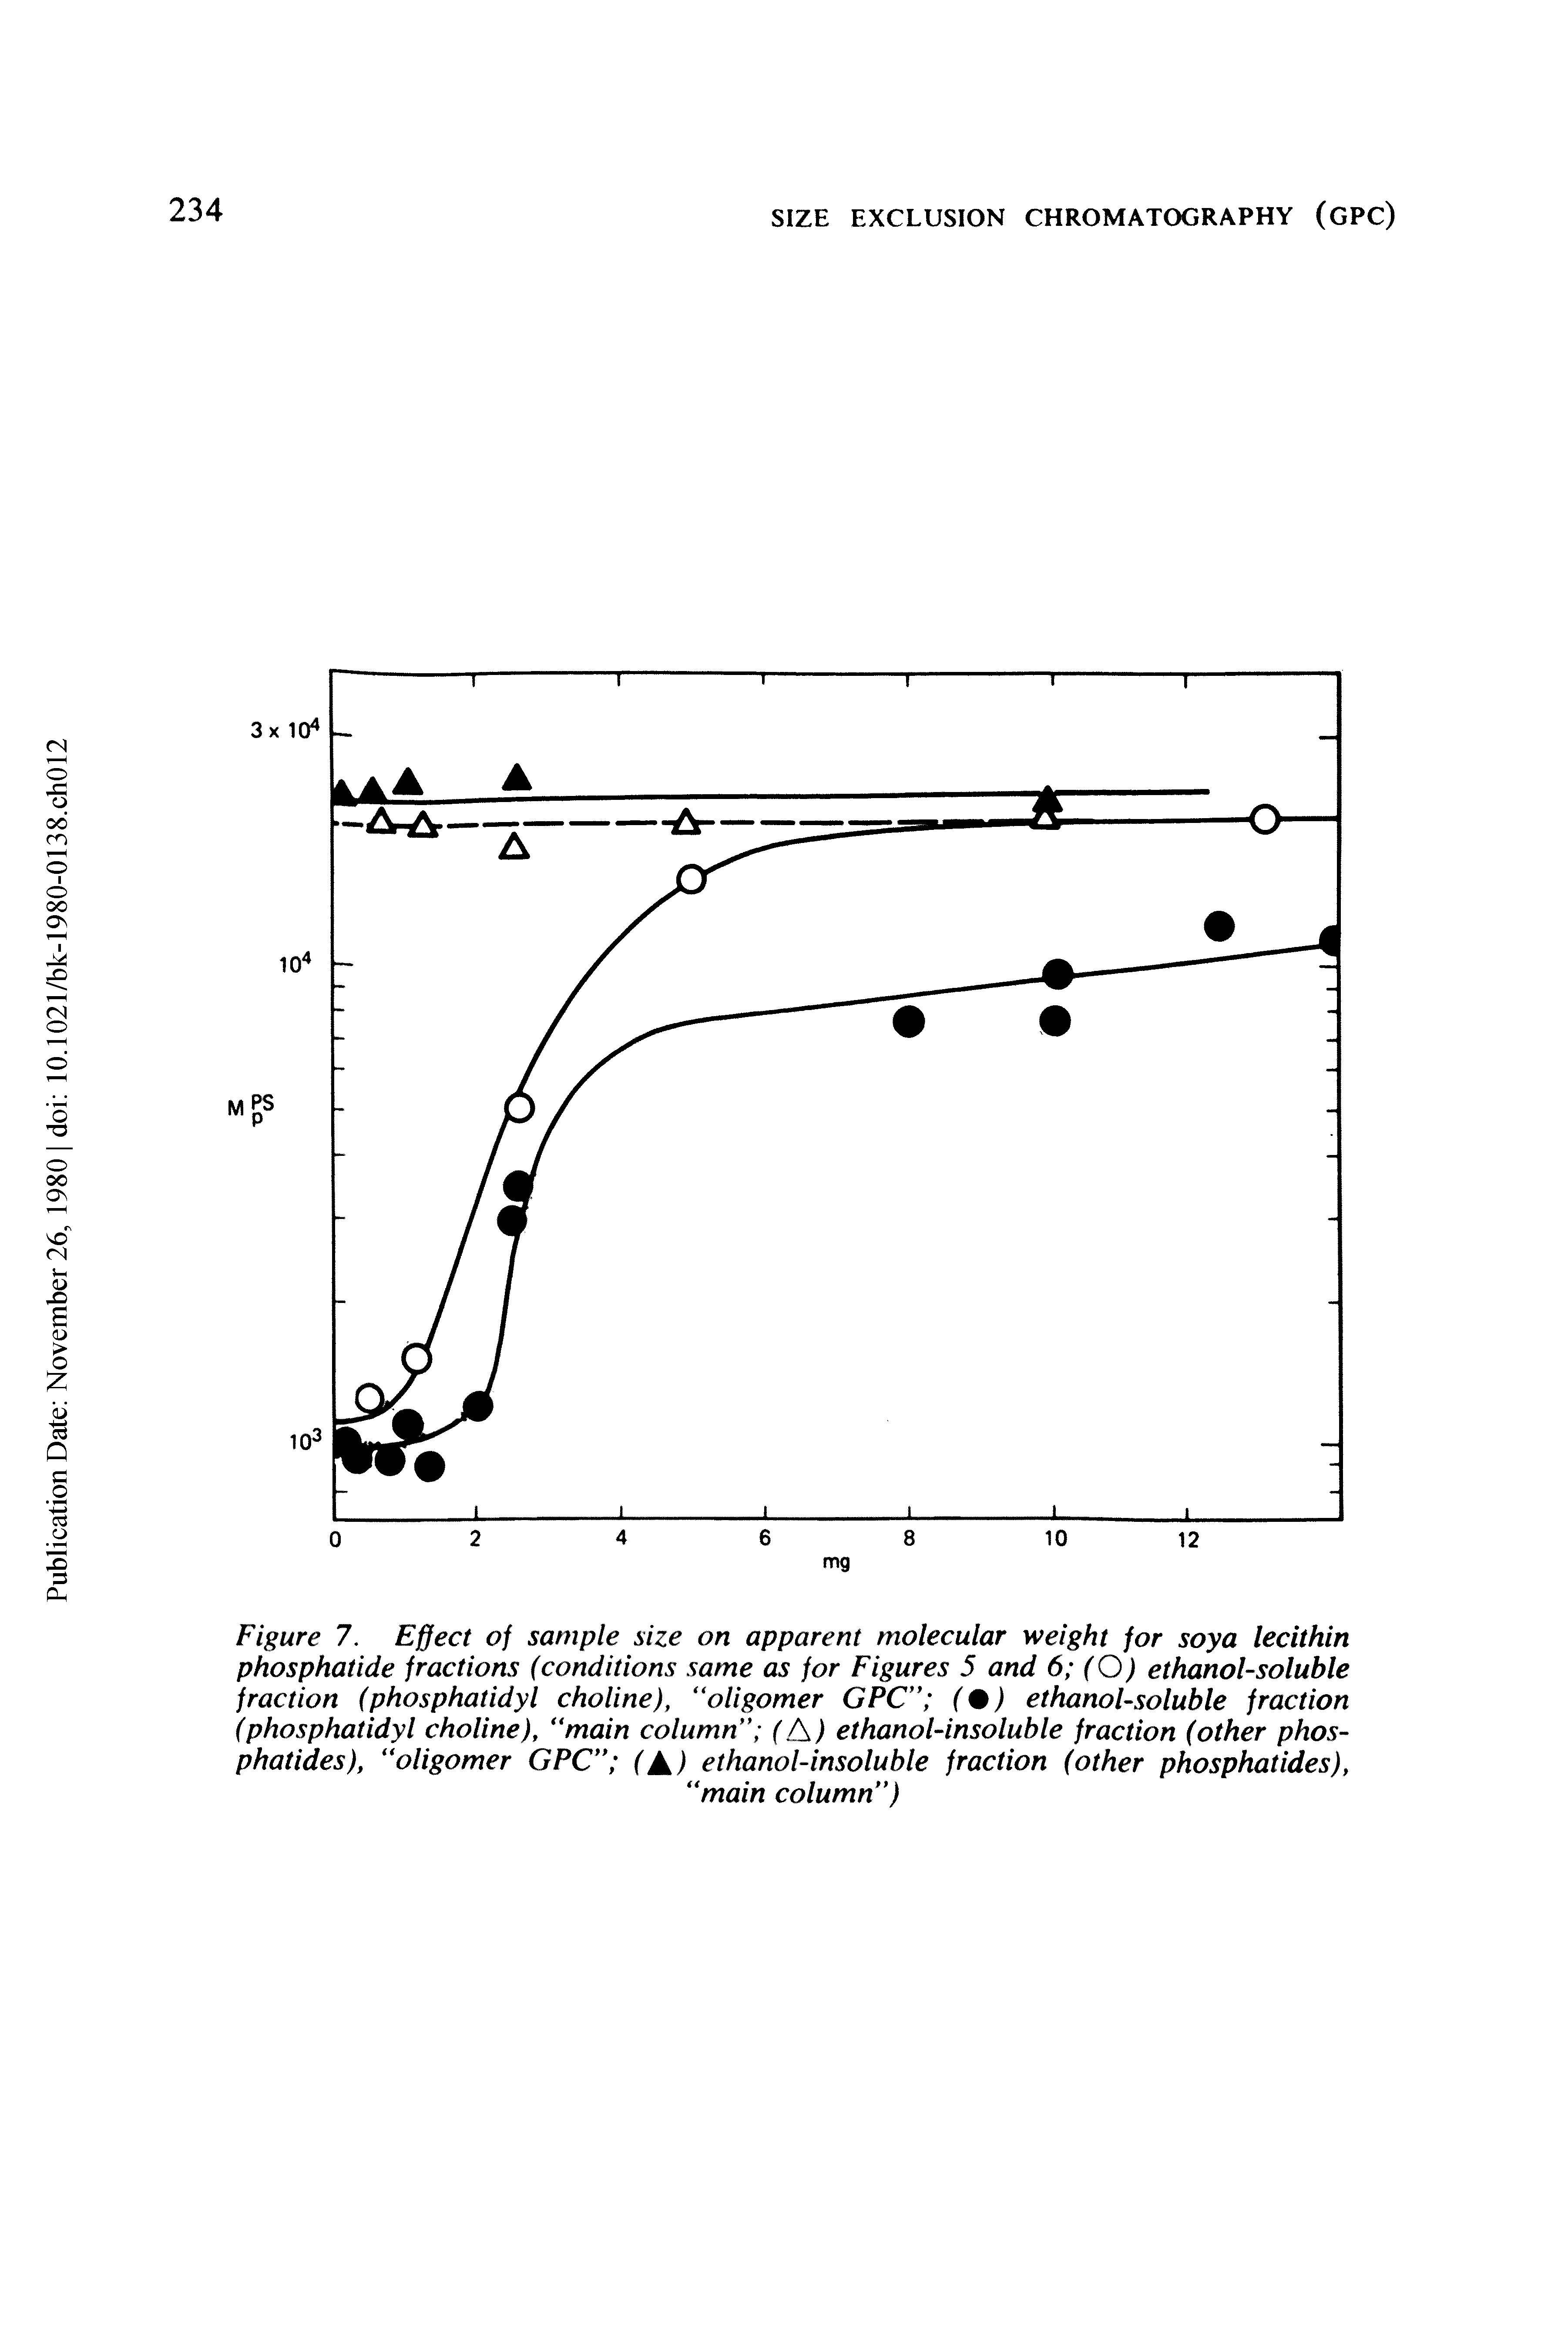 Figure 7. Effect of sample size on apparent molecular weight for soya lecithin phosphatide fractions (conditions same as for Figures 5 and 6 (O) ethanol-soluble fraction (phosphatidyl choline), oligomer GPC (%) ethanol-soluble fraction (phosphatidyl choline), "main column (l ) ethanol-insoluble fraction (other phos-p hat ides), "oligomer GPC (A) ethanol-insoluble fraction (other phosphatides),...